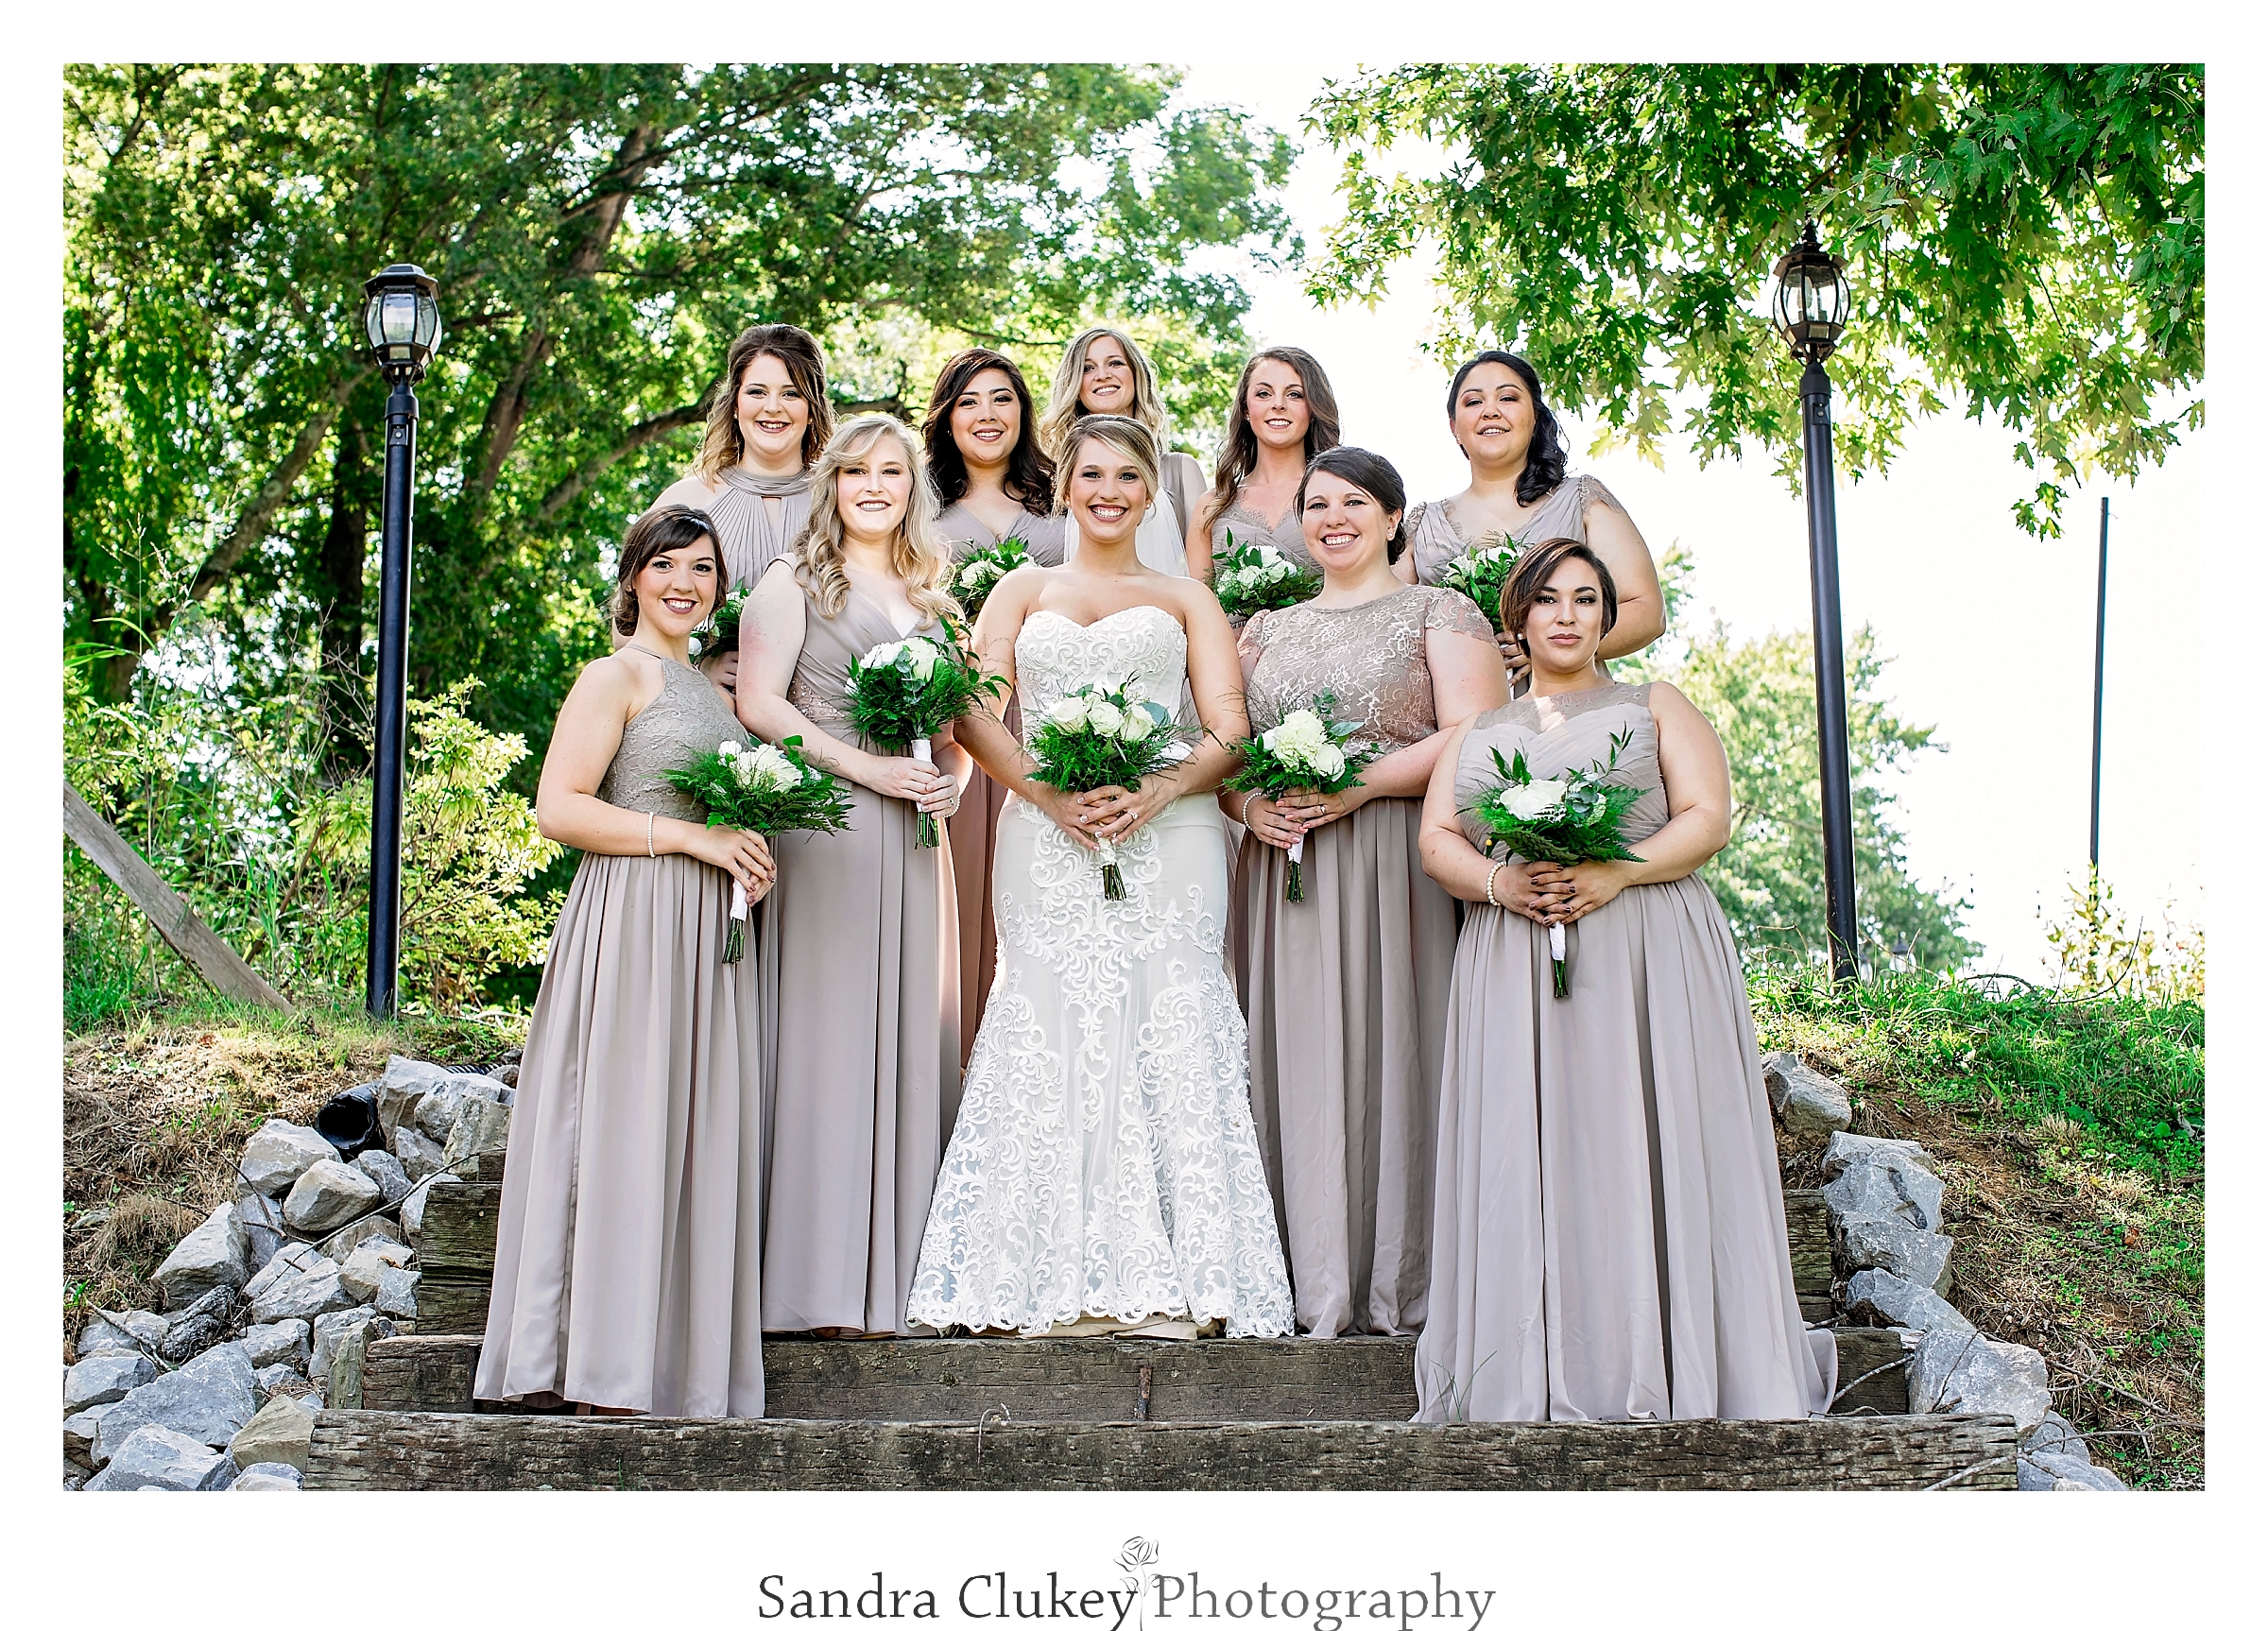 Stunning bride and bridesmaids. Tennessee RiverPlace, Chattanooga TN